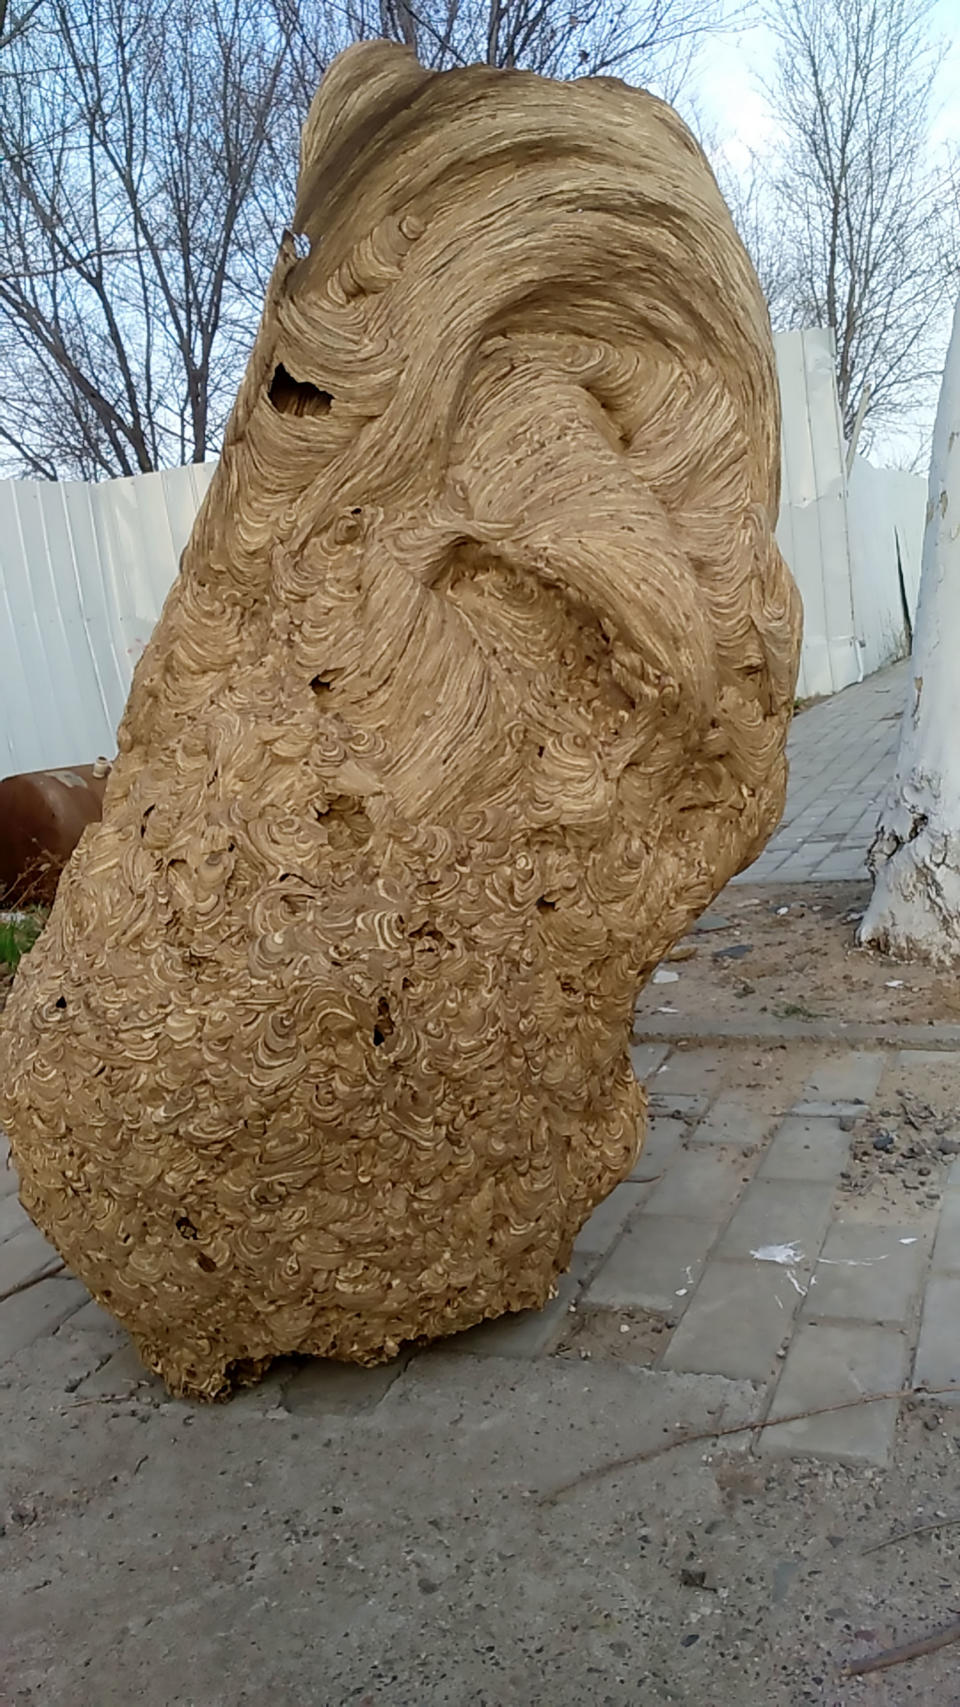 Pic Shows: The 6-foot wasp nest found in Zhang Juwei's home;  This is the huge wasp nest found in a newly built home which went unoccupied for so long it was taken over by the colony of flying insects.